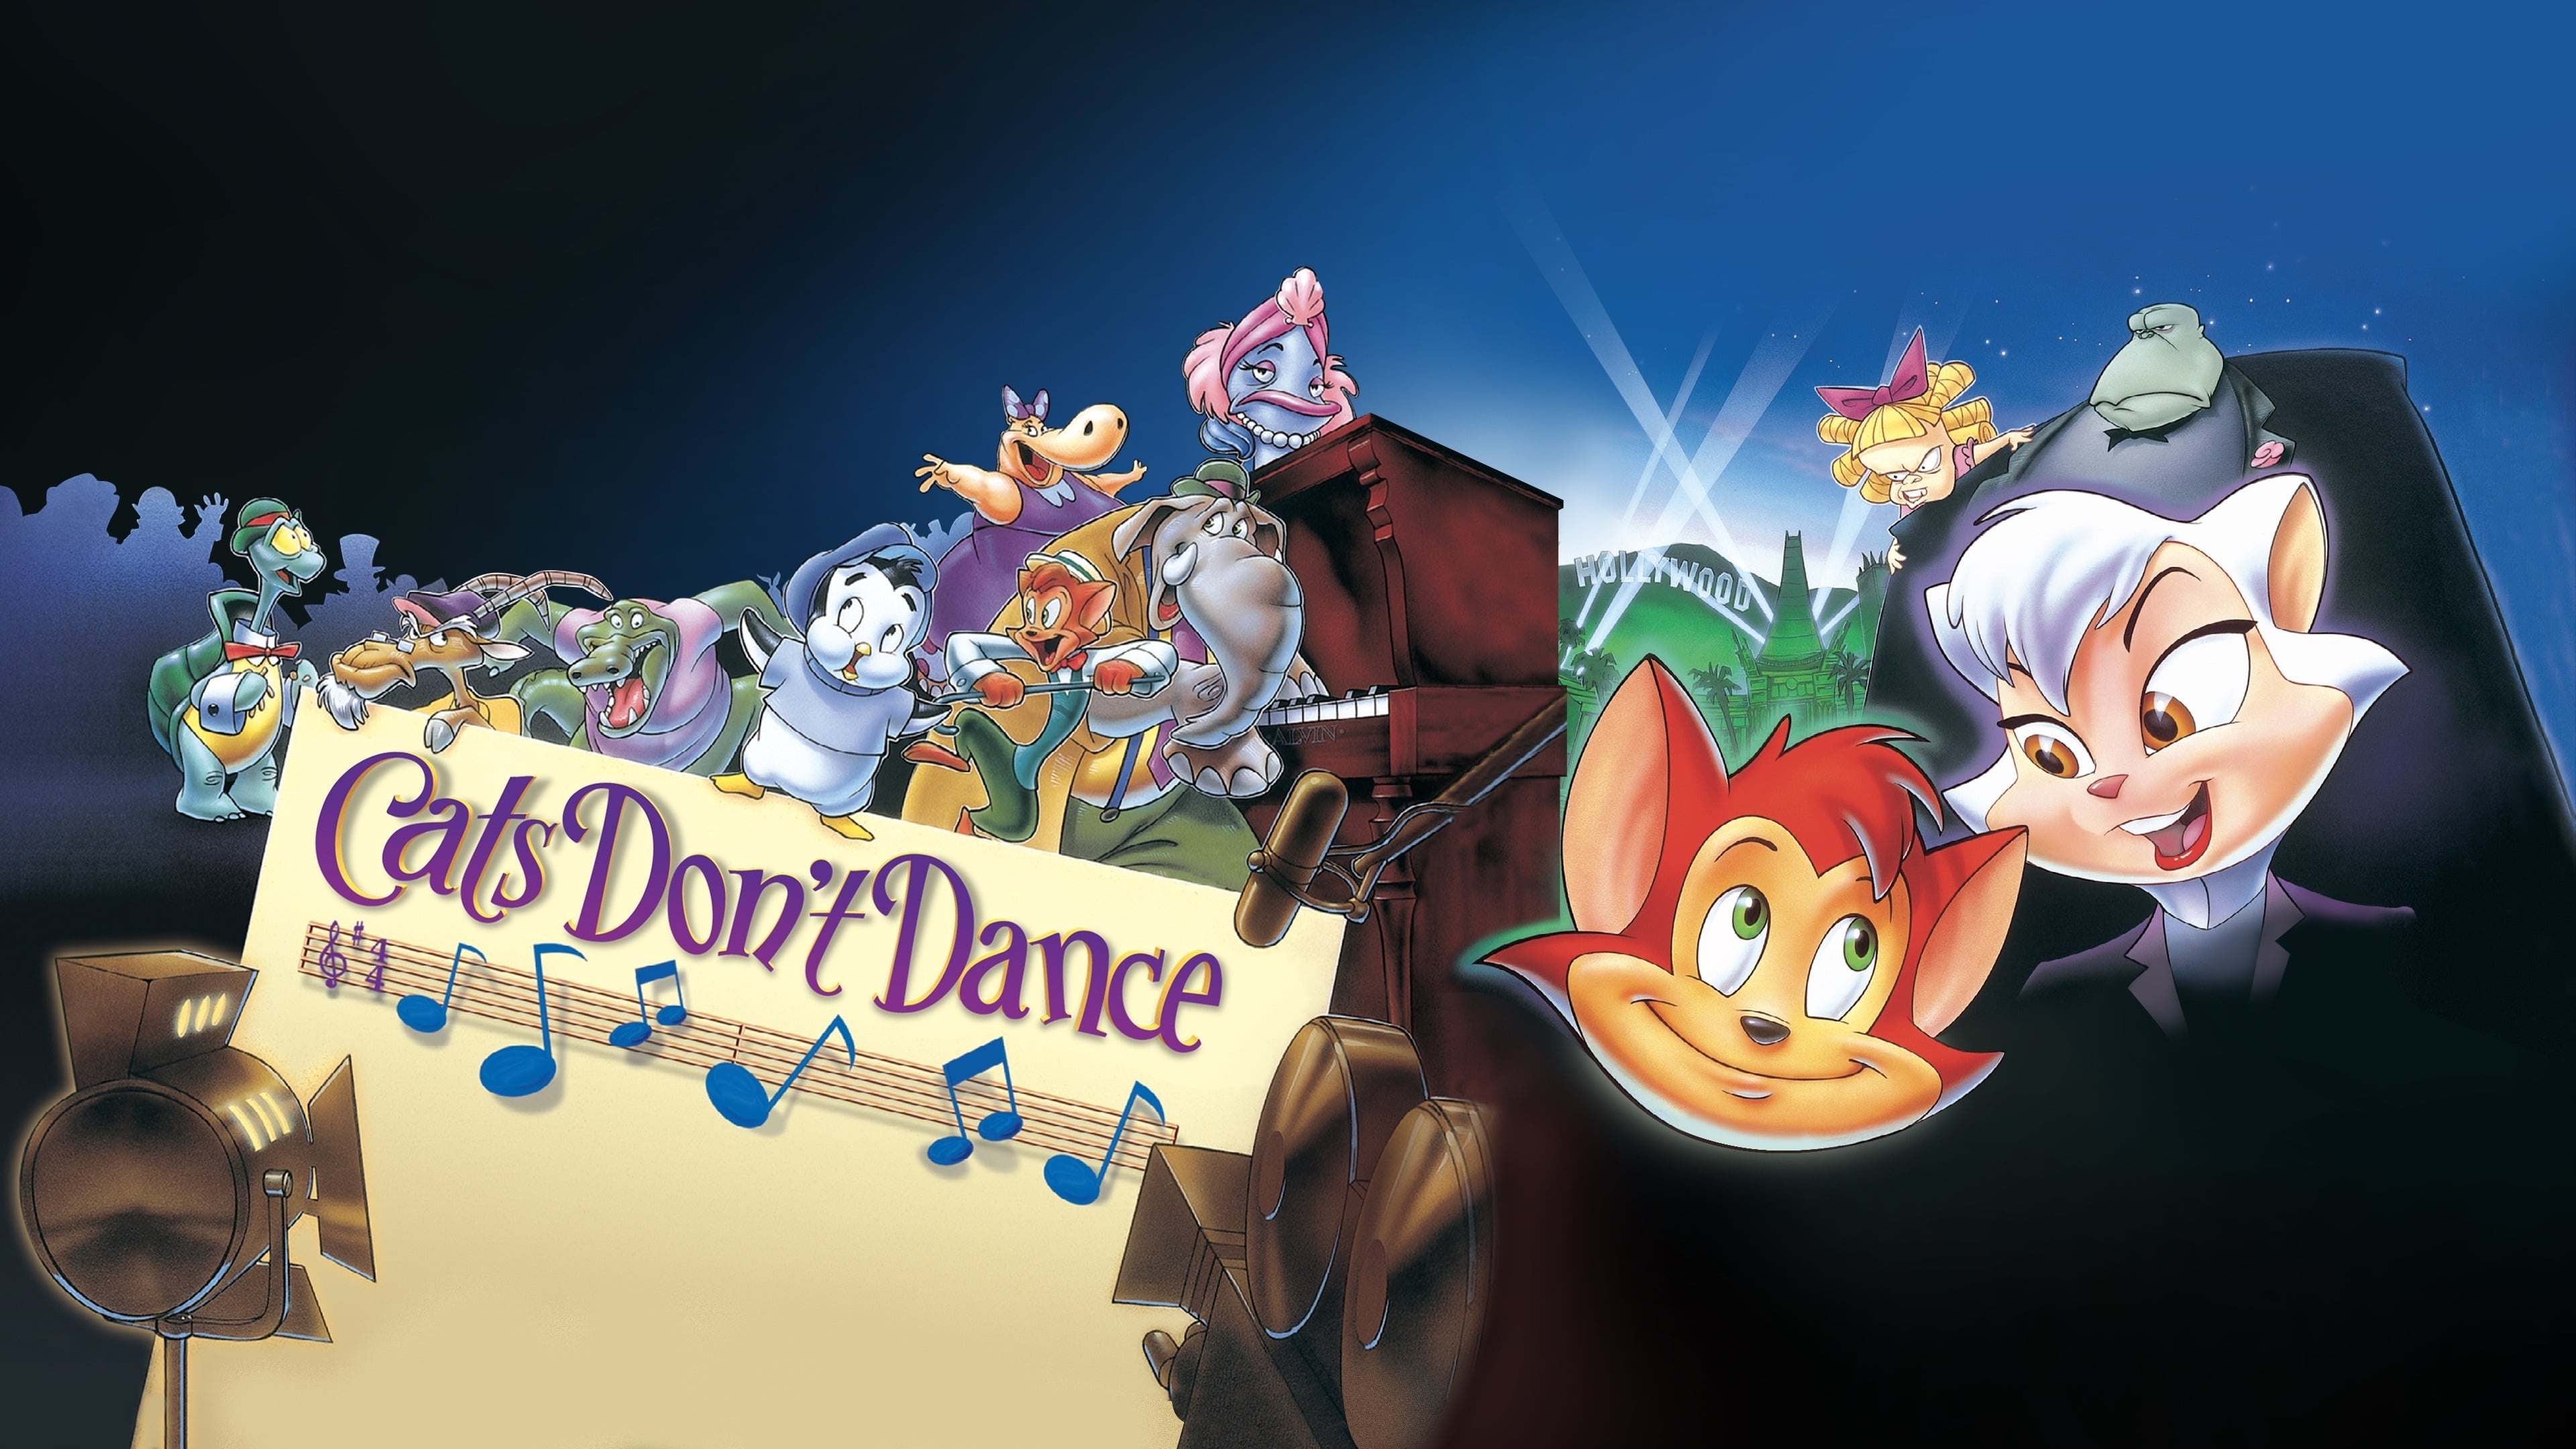 Cats Don't Dance (1997): An American animated musical comedy film, Distributed by Warner Bros. 3840x2160 4K Wallpaper.